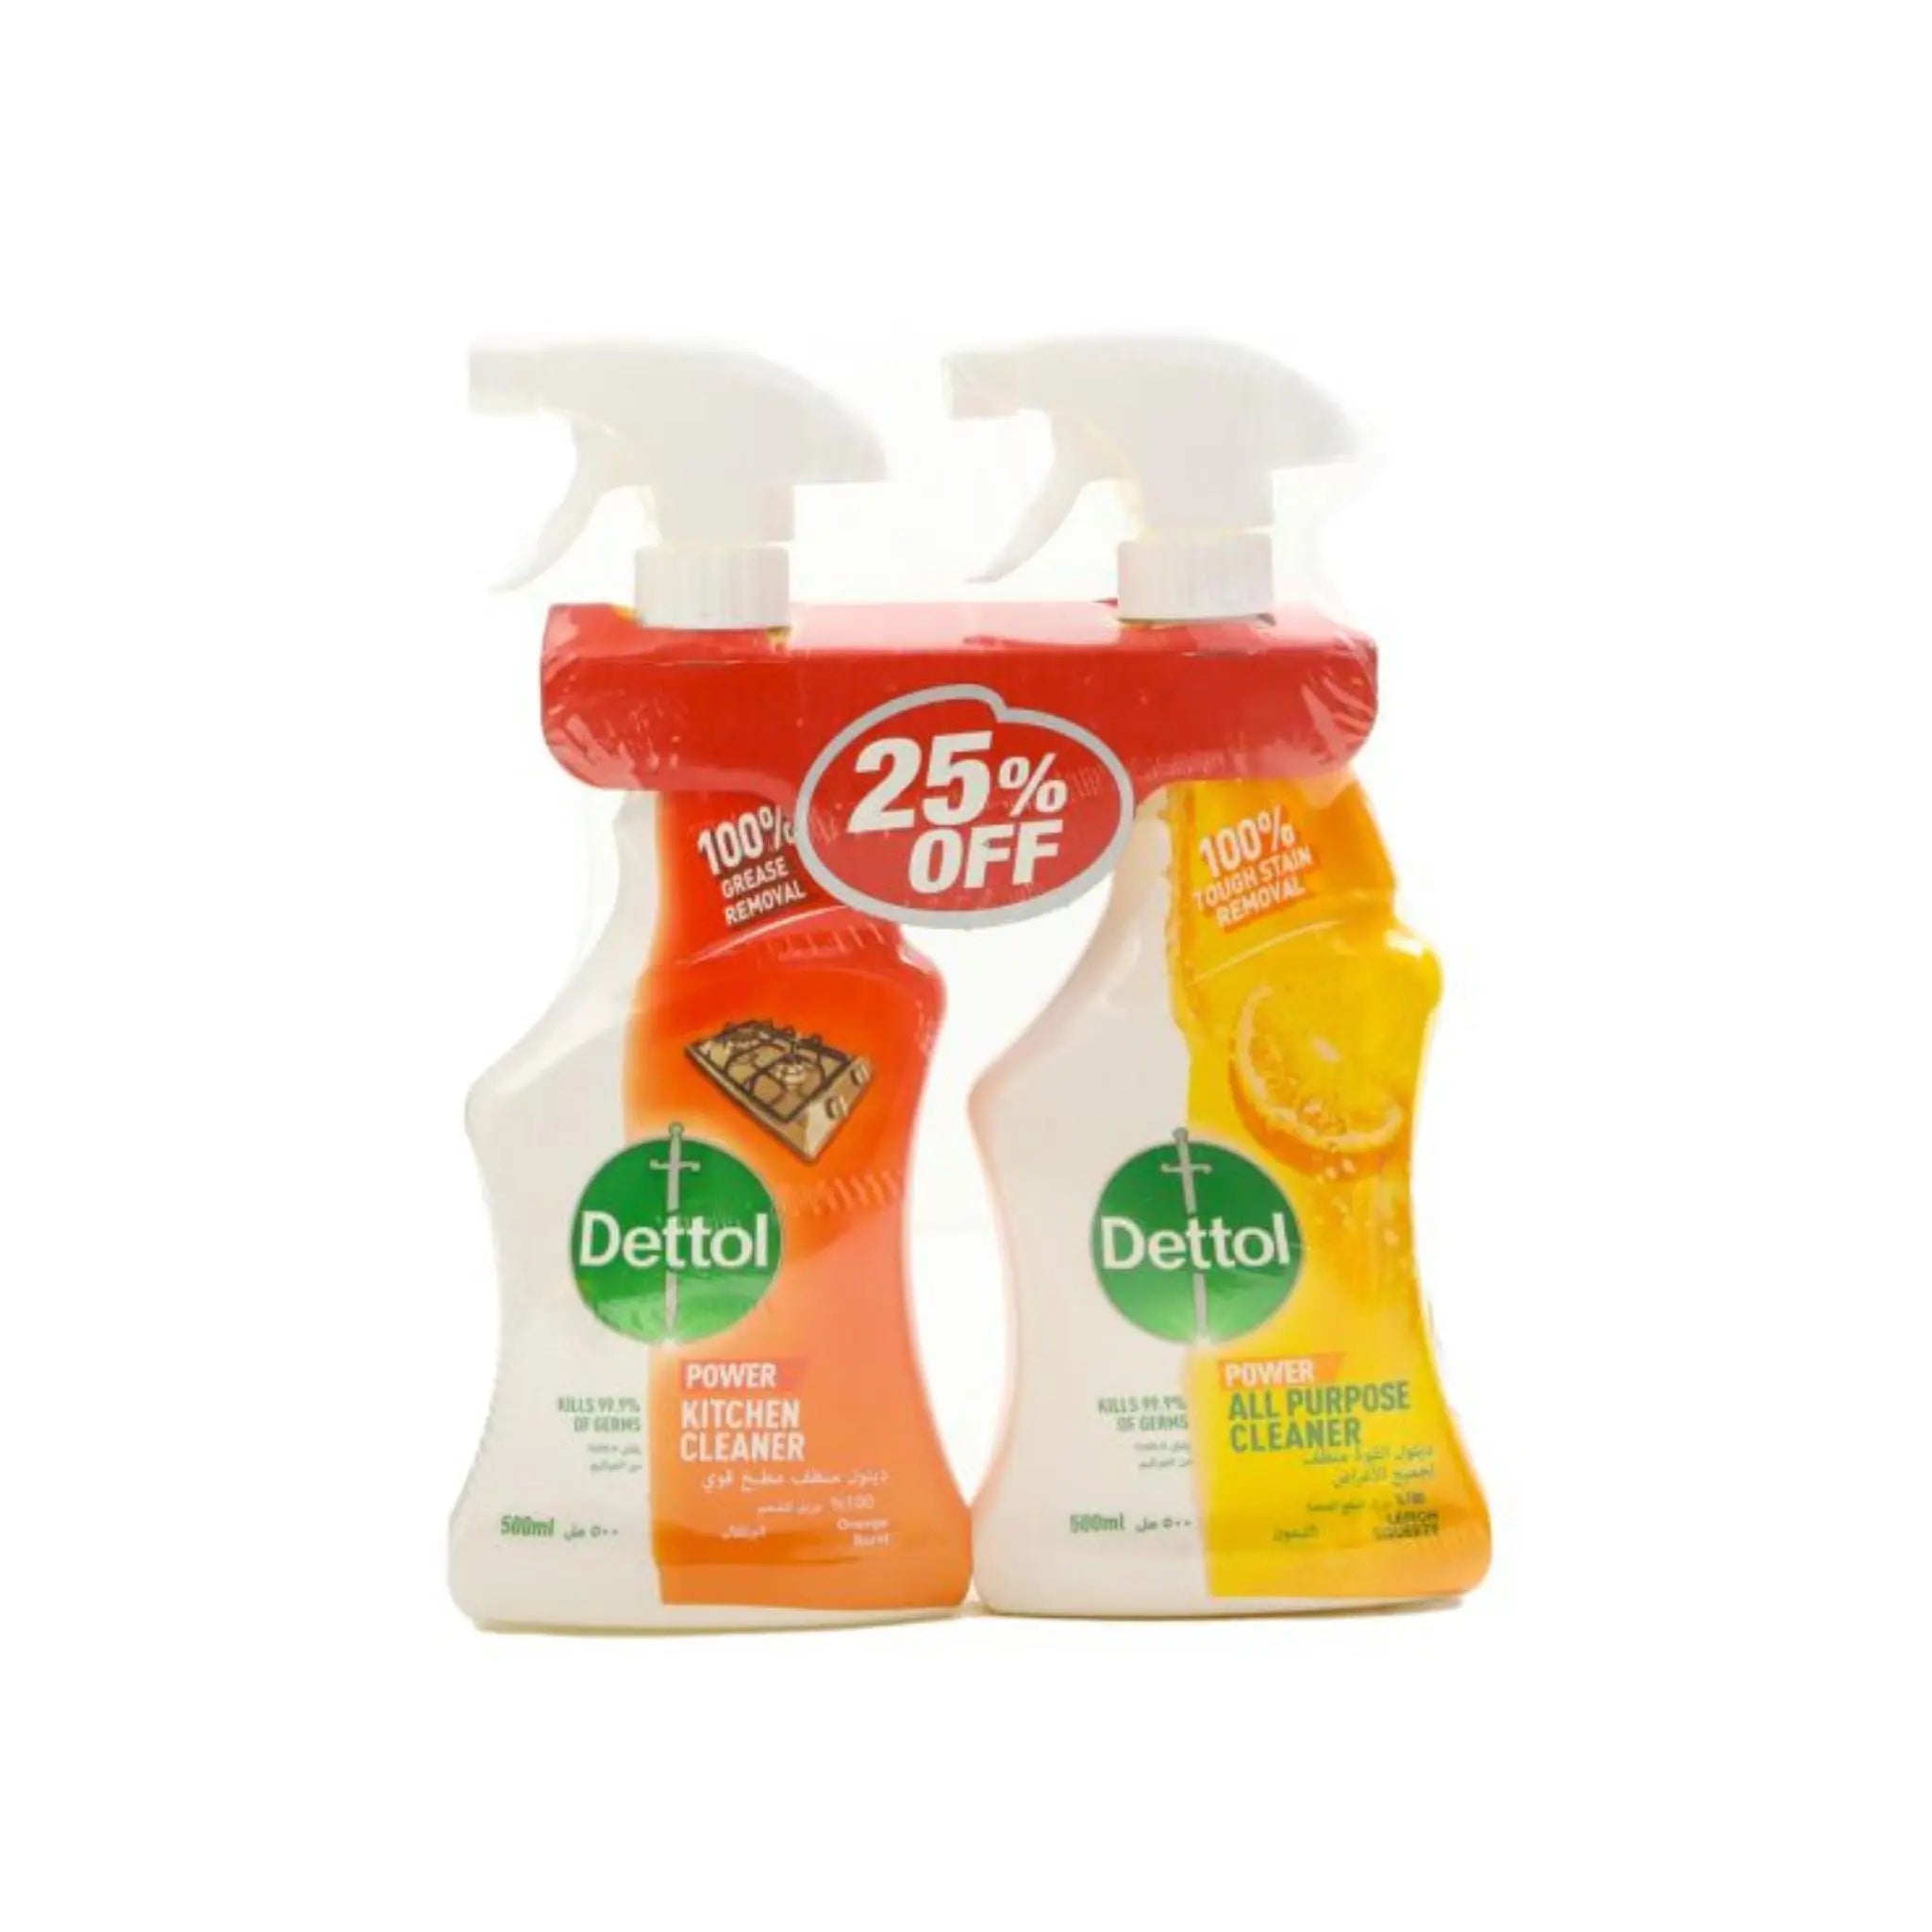 Dettol All Purpose Power 500ml + Kitchen Cleaner 500ml Offer Pack - 2x6 sets (1 carton) Marino.AE